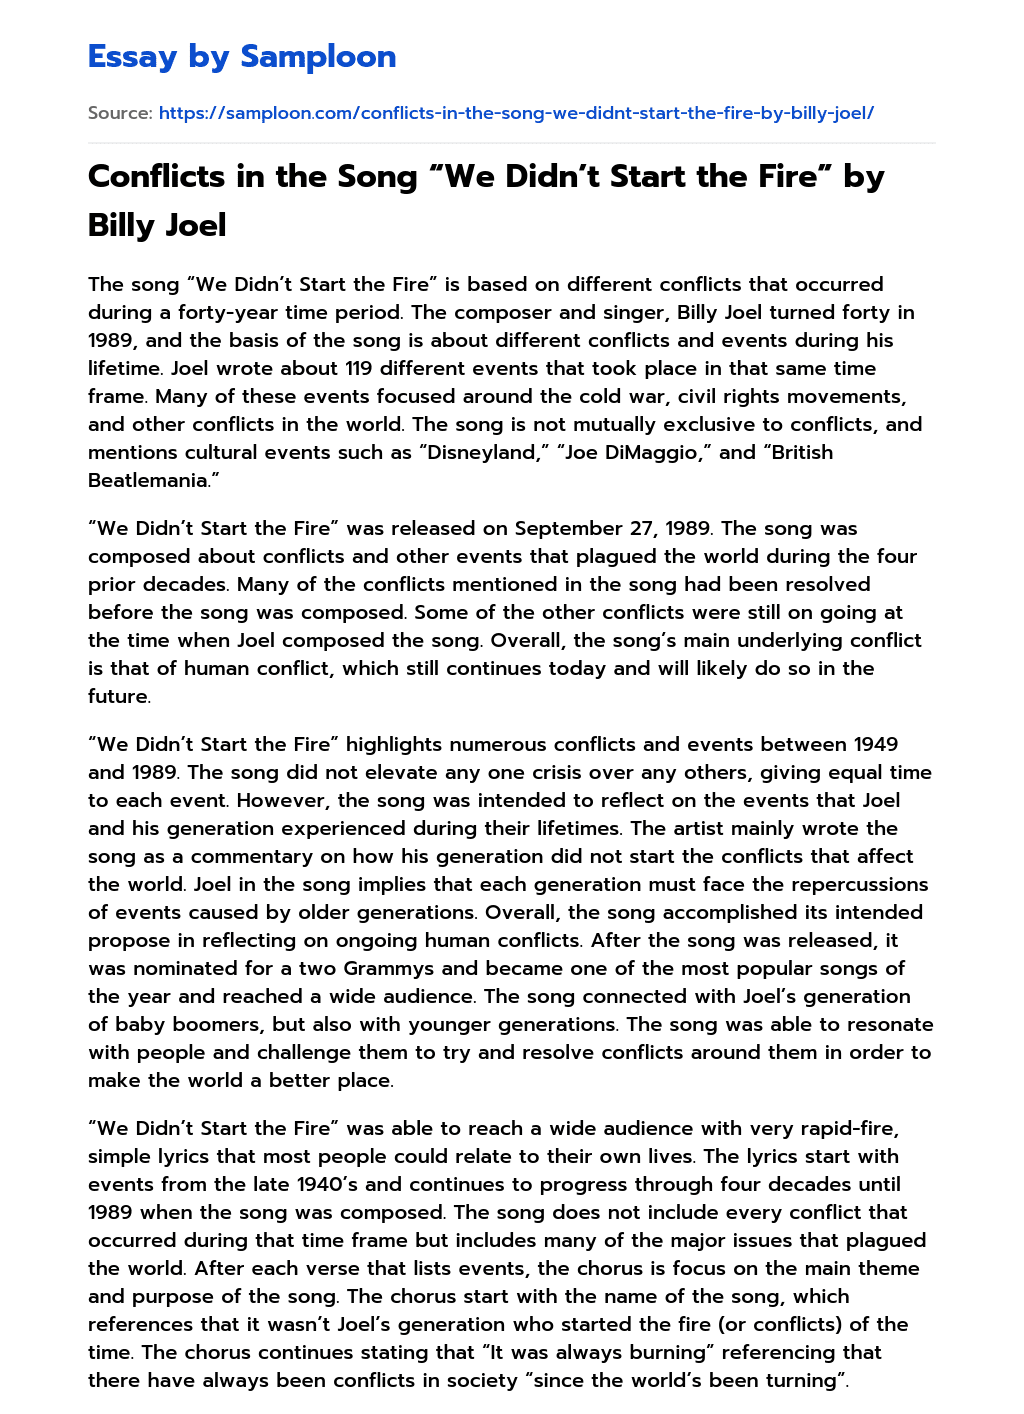 Conflicts in the Song “We Didn’t Start the Fire” by Billy Joel essay